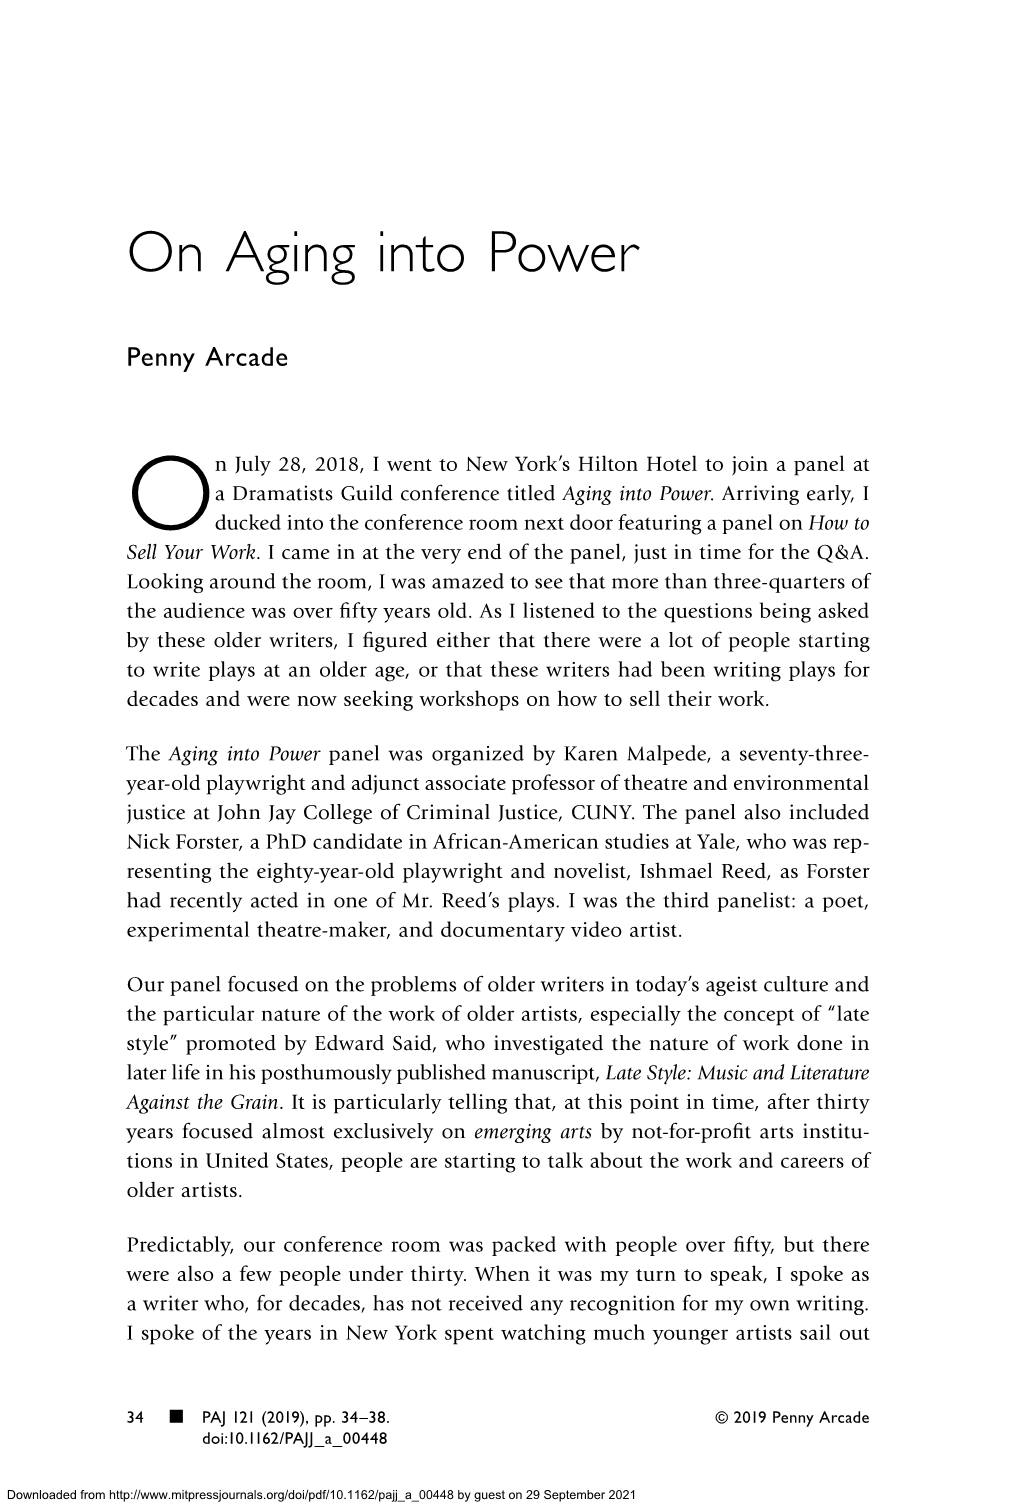 On Aging Into Power